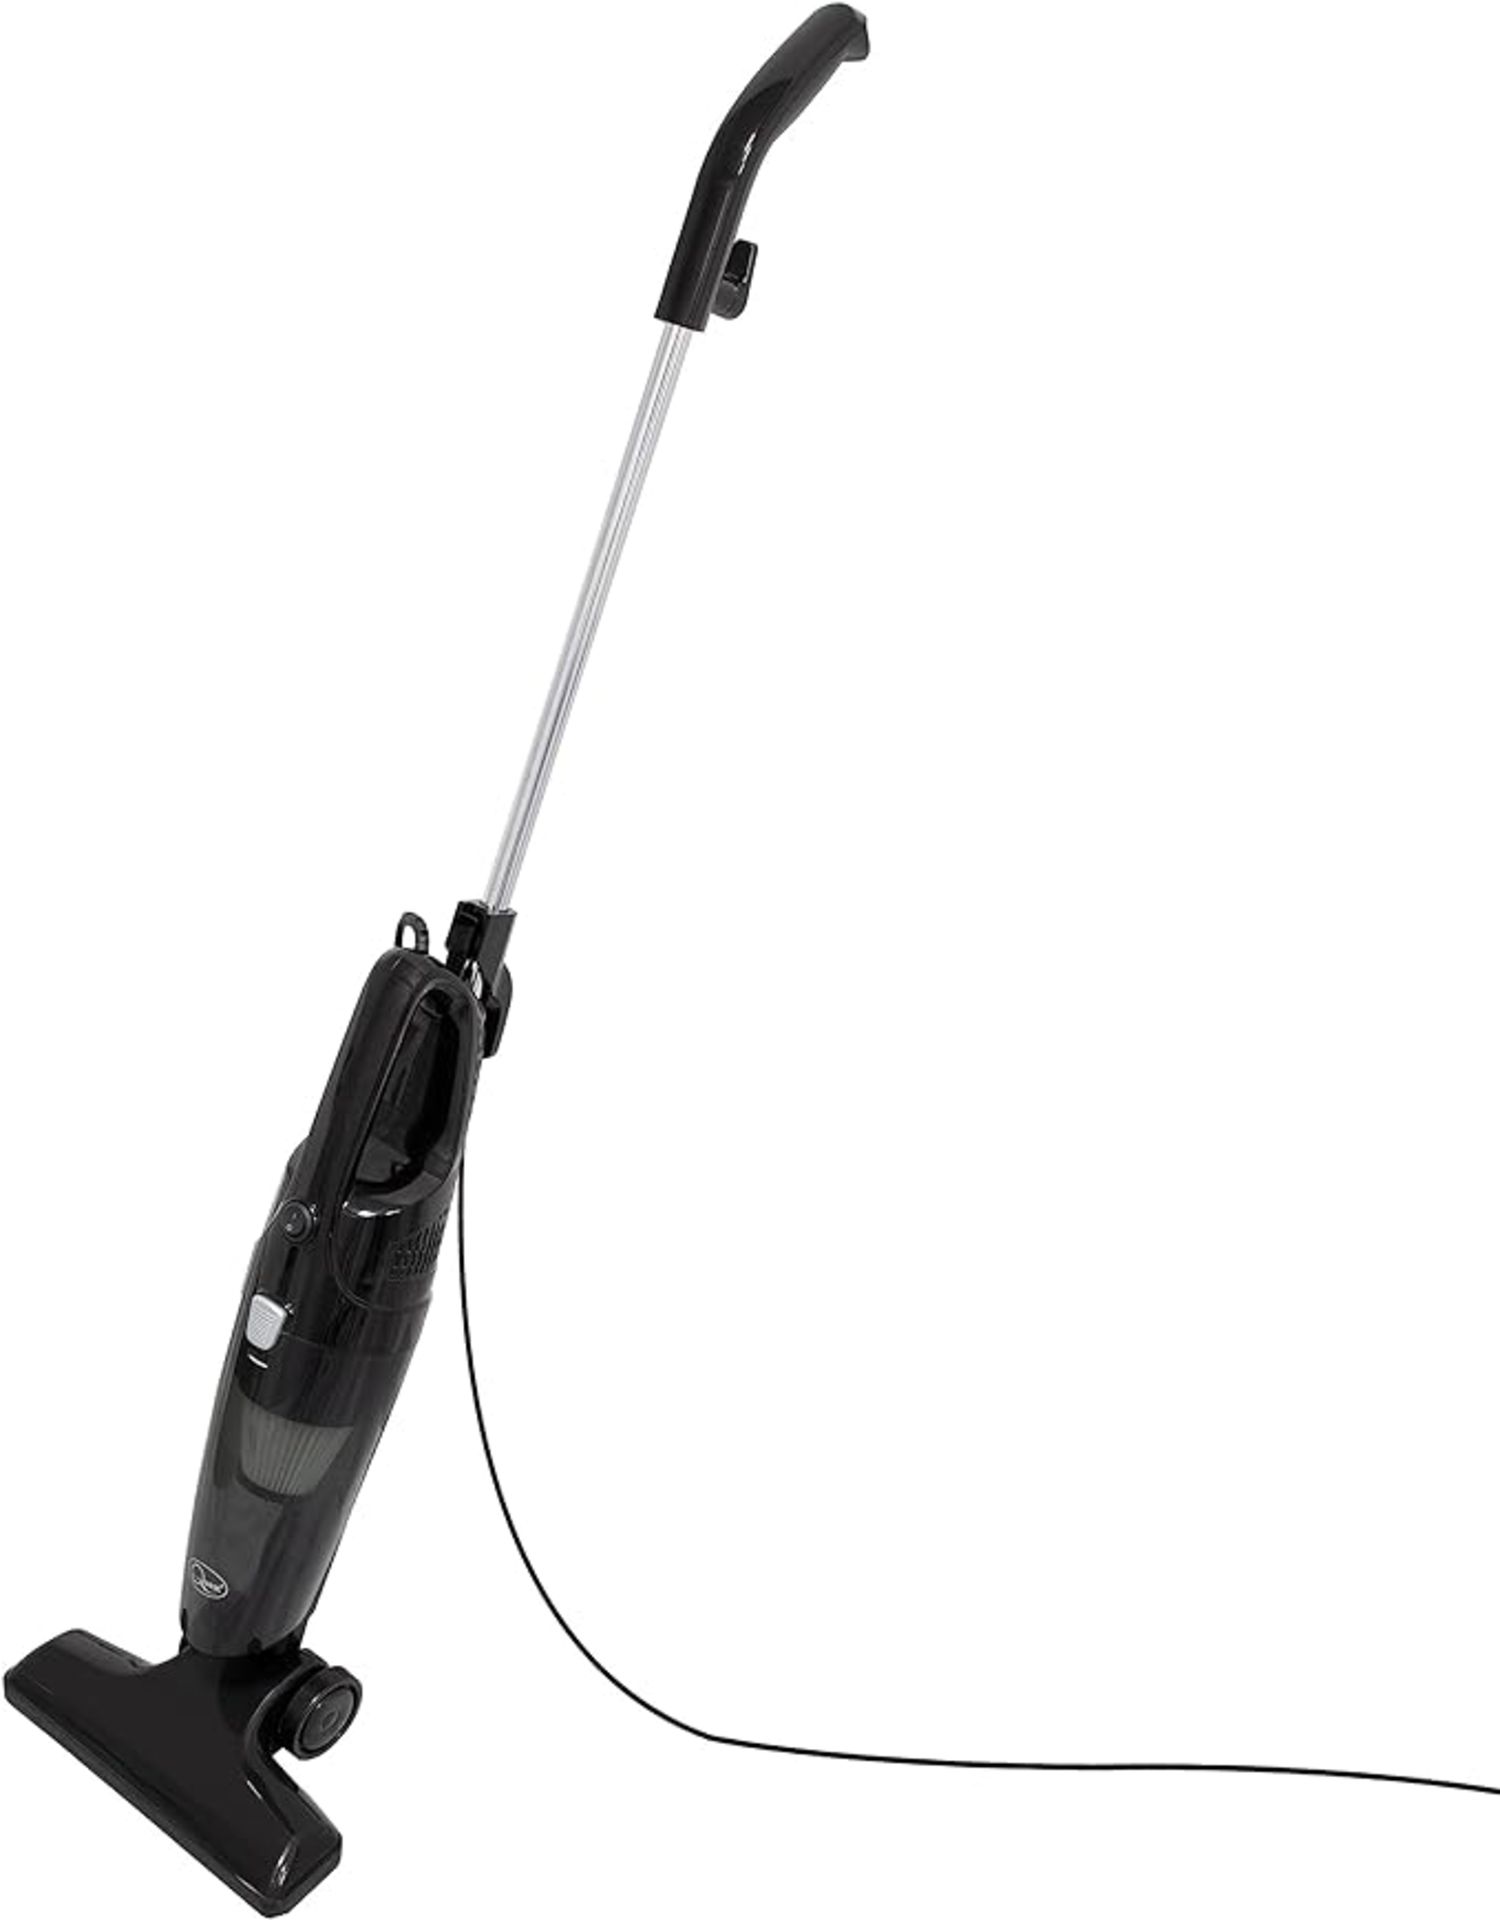 Quest 44839 2-in-1 Bagless Vacuum Cleaner/Use Upright or Handheld/Lightweight Compact Design/HEPA